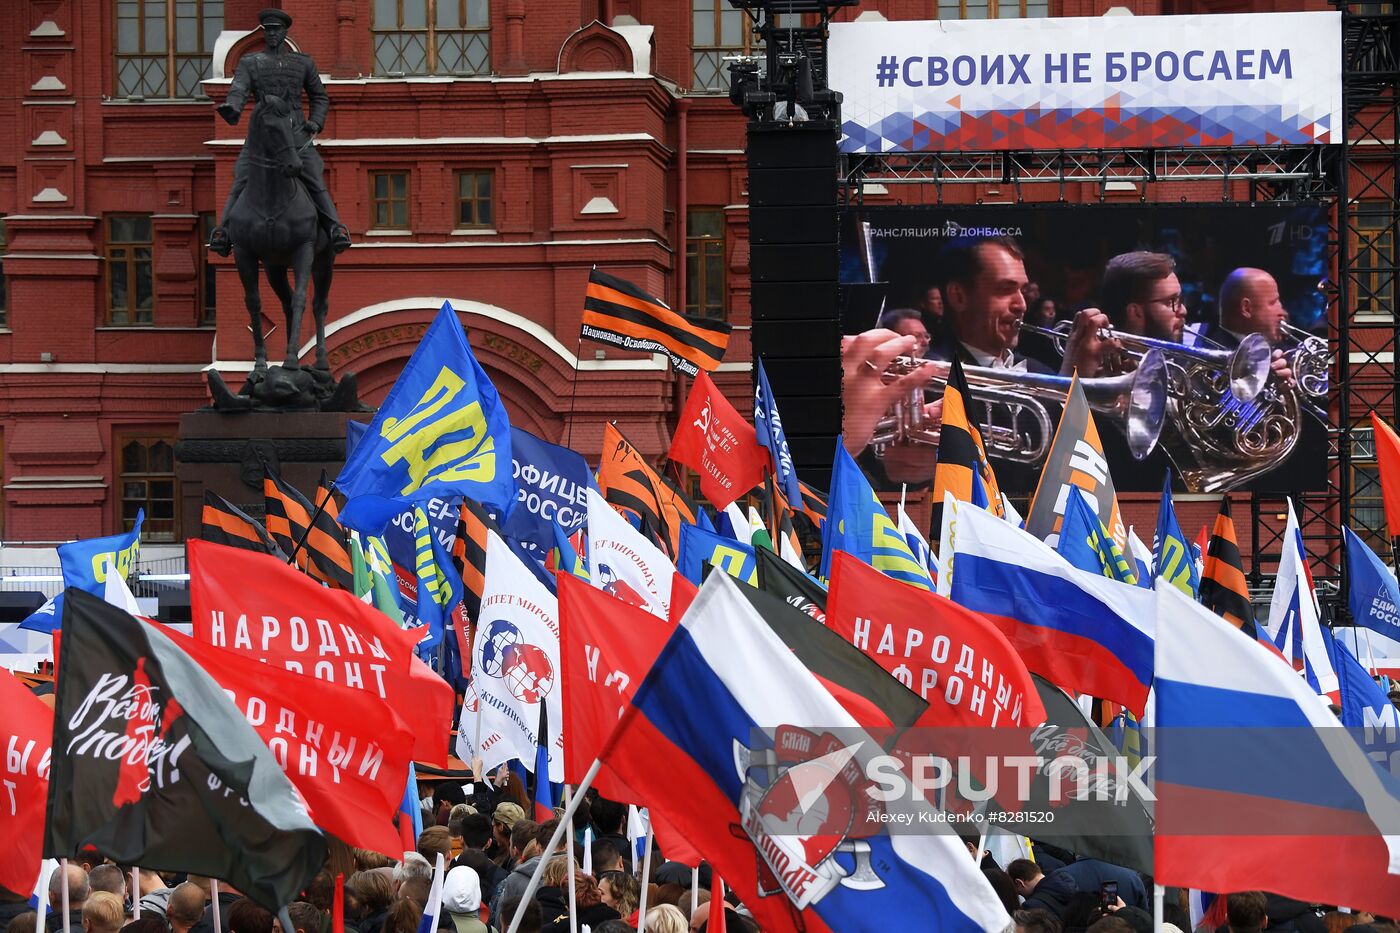 Russia Joining Referendum Support Rally